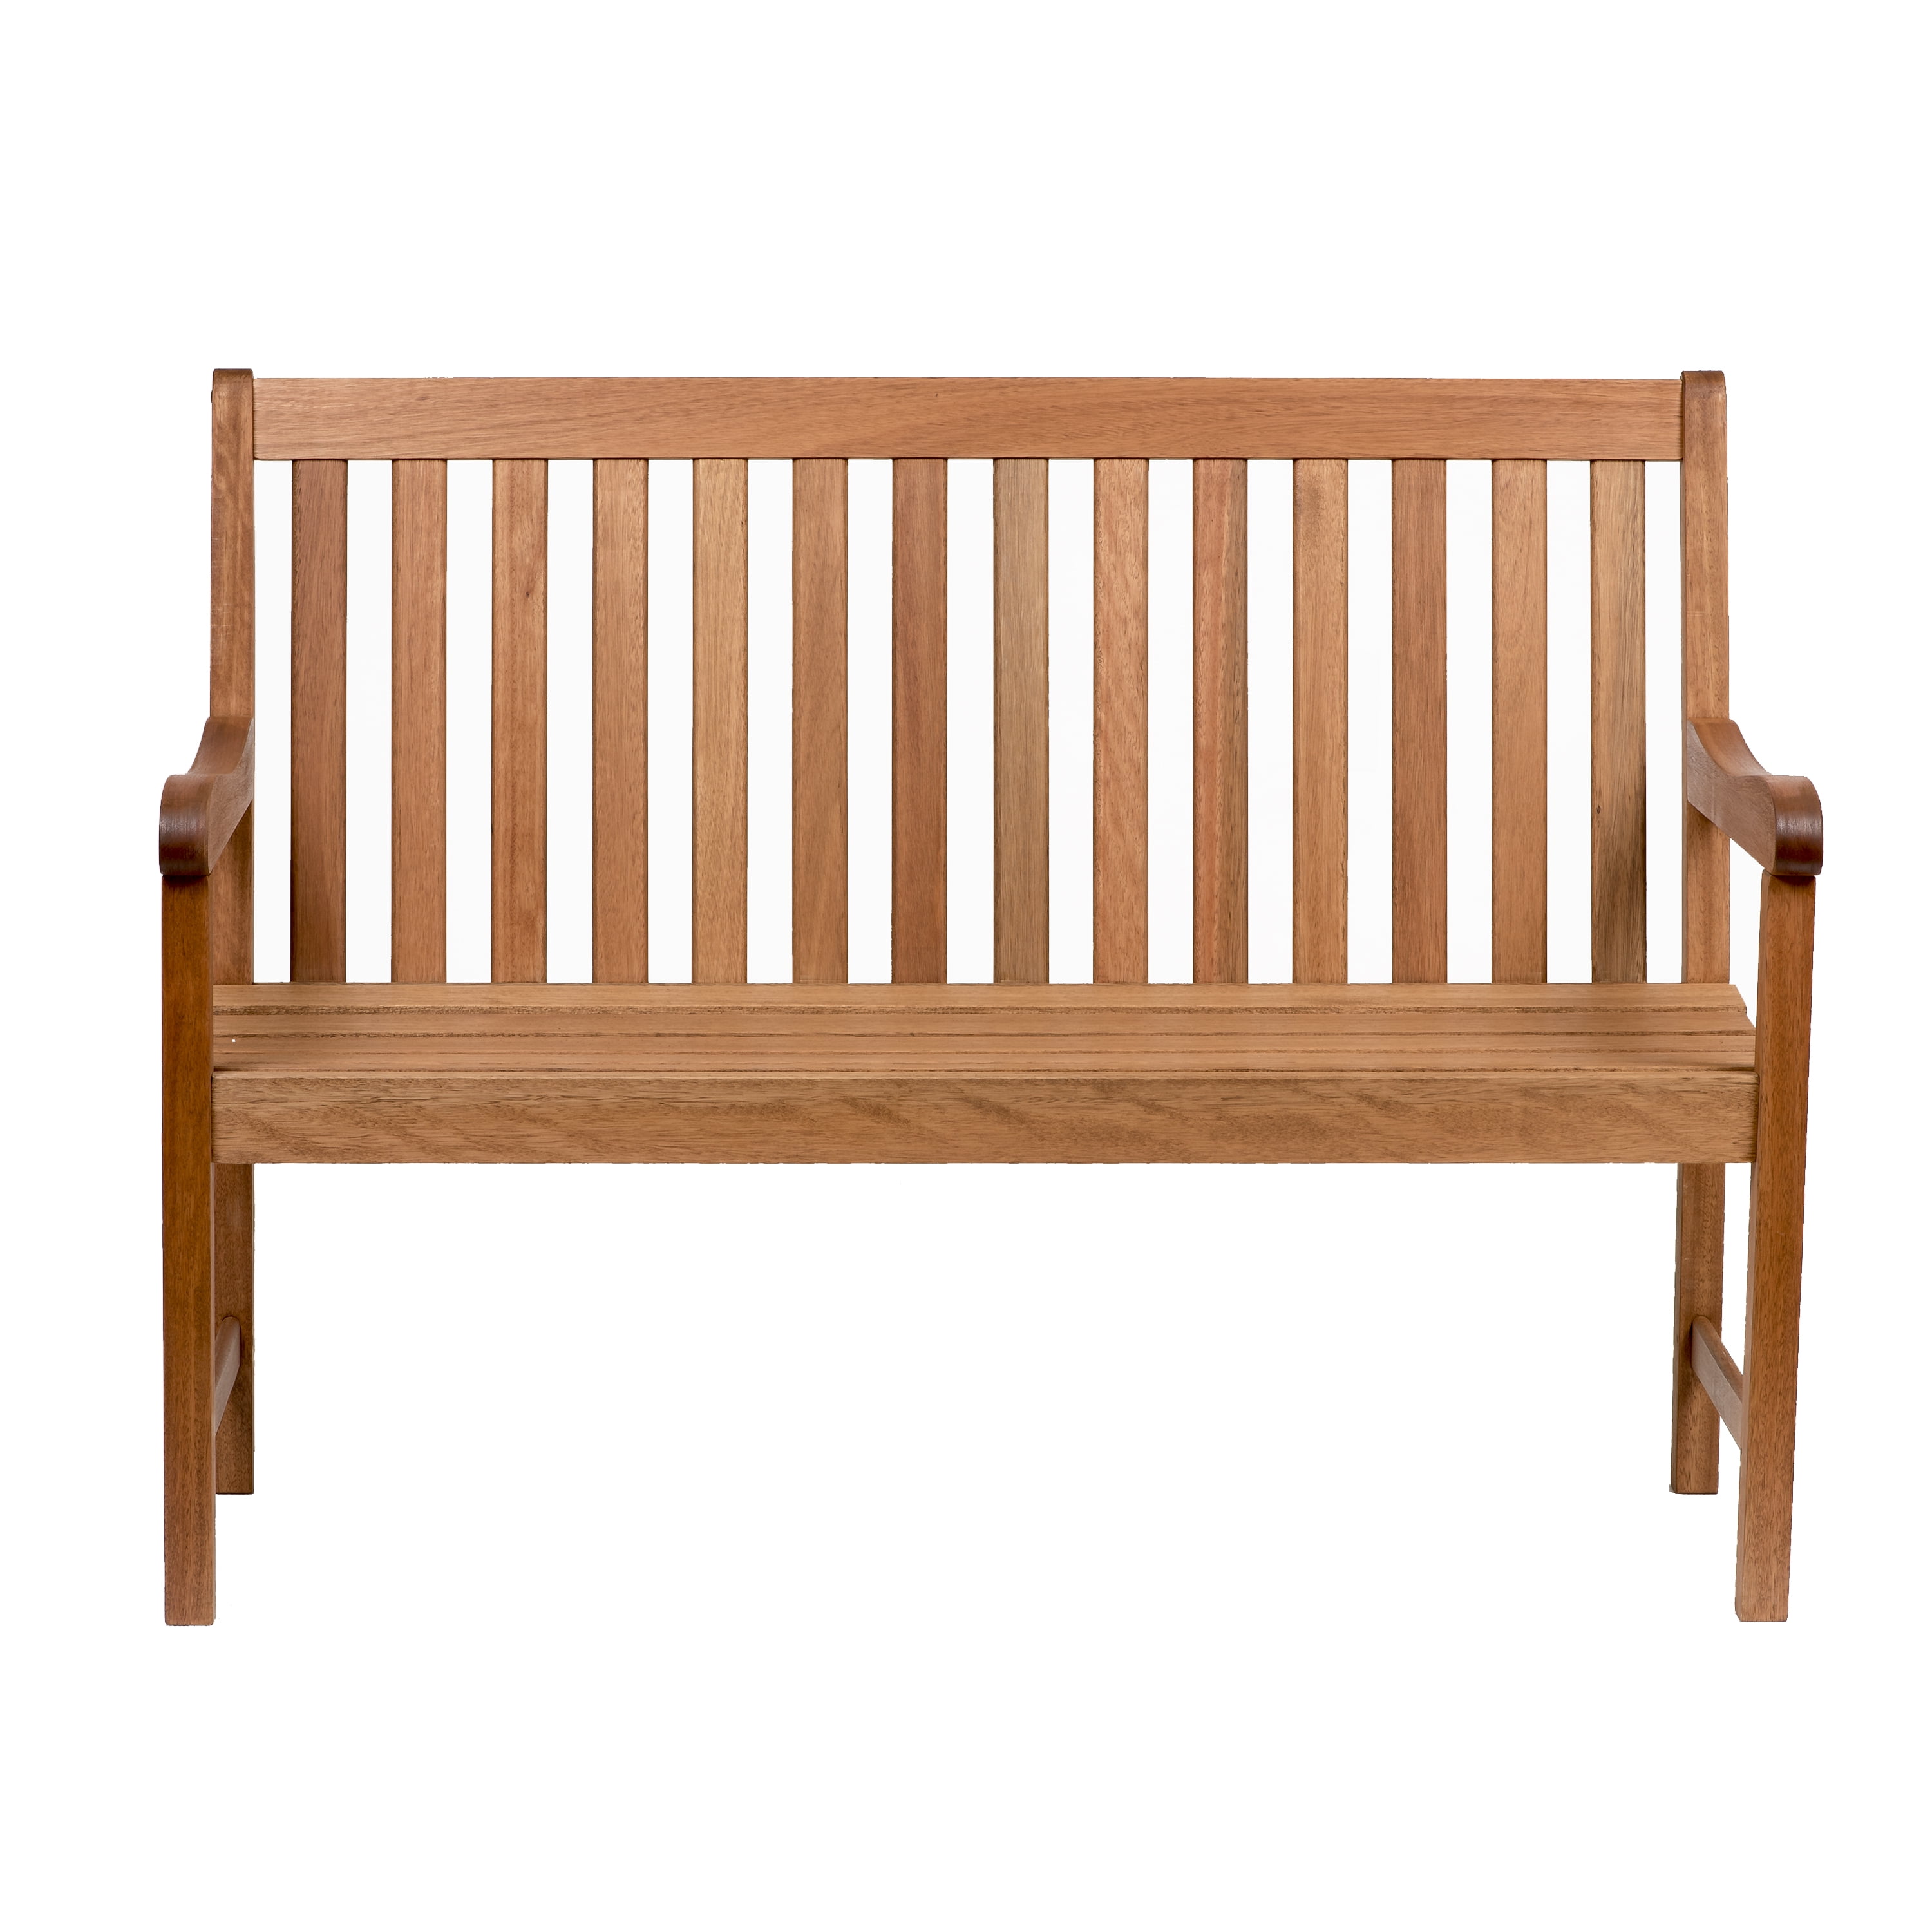 Photo 1 of Amazonia Milano Patio Bench 4-Feet Eucalyptus Wood Ideal for Outdoors and Indoors